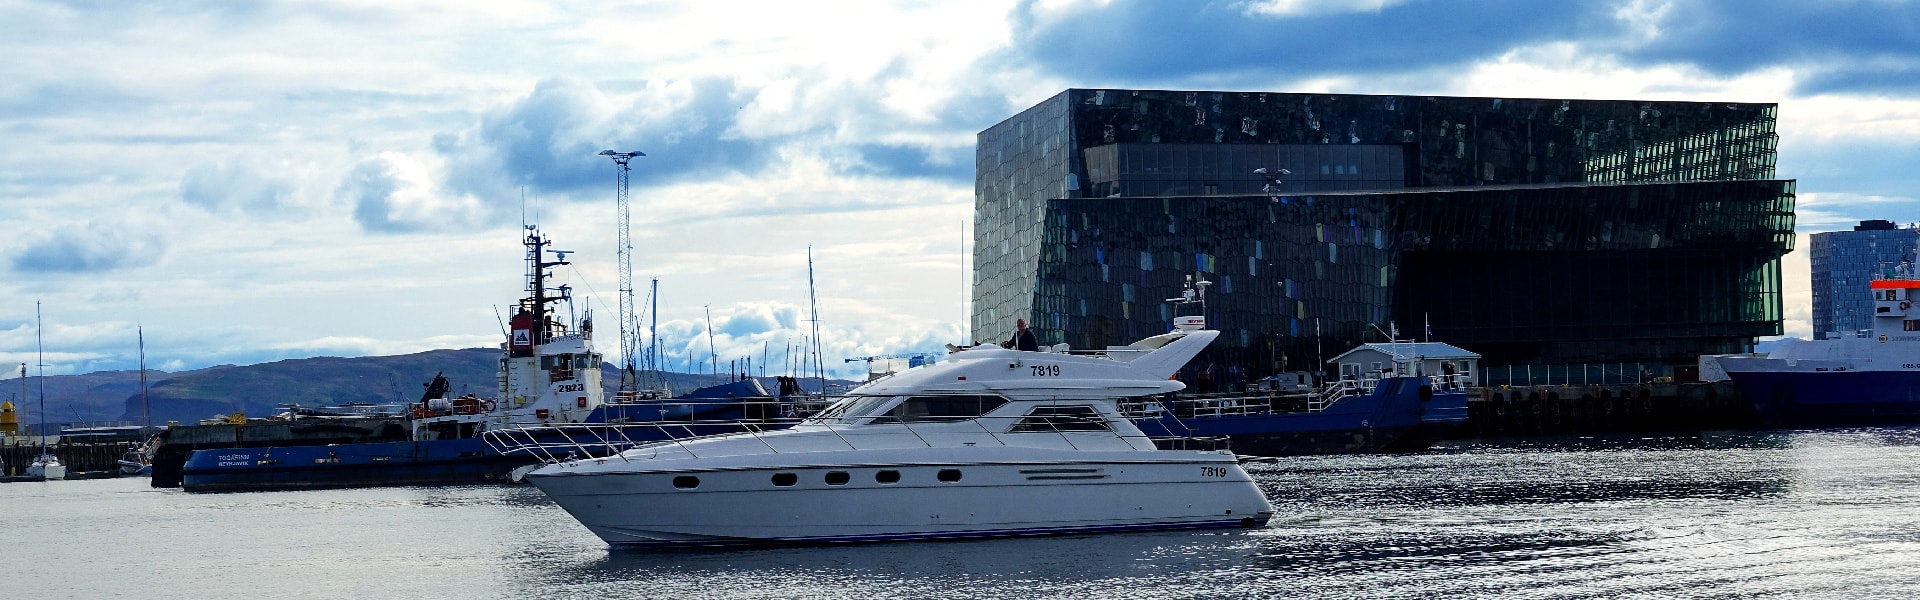 image of the yacht Axel Rose, used for whale watching and puffin tours from Reykjavik in Iceland, available for private rent